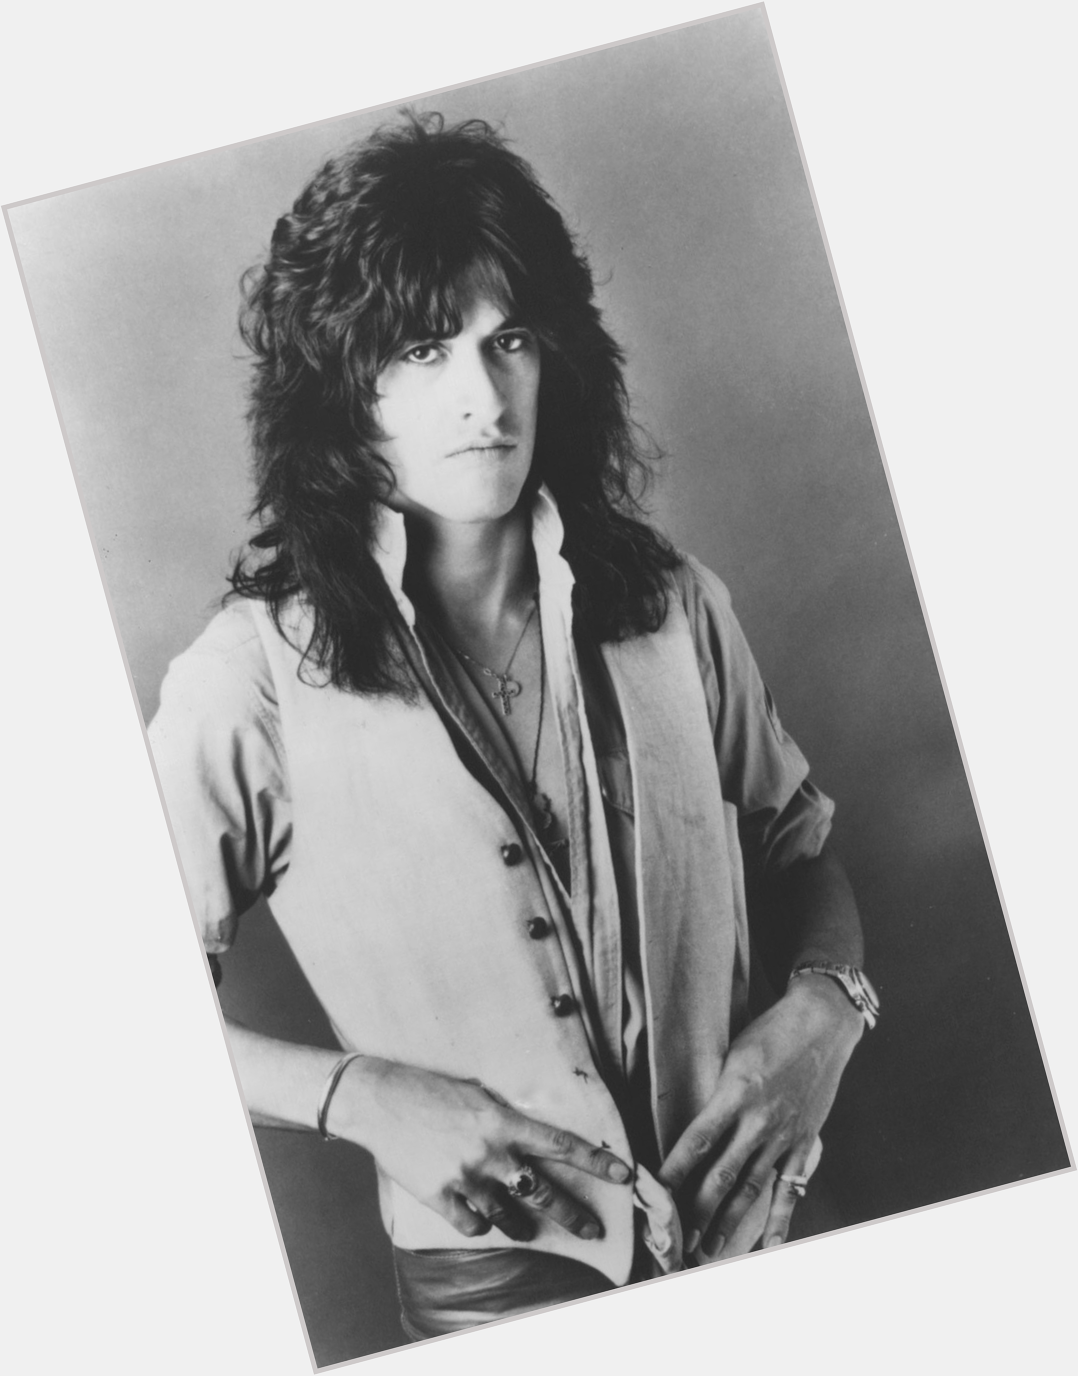 Happy 70th Birthday to Joe Perry of Aerosmith, born this day in Lawrence, MA. 